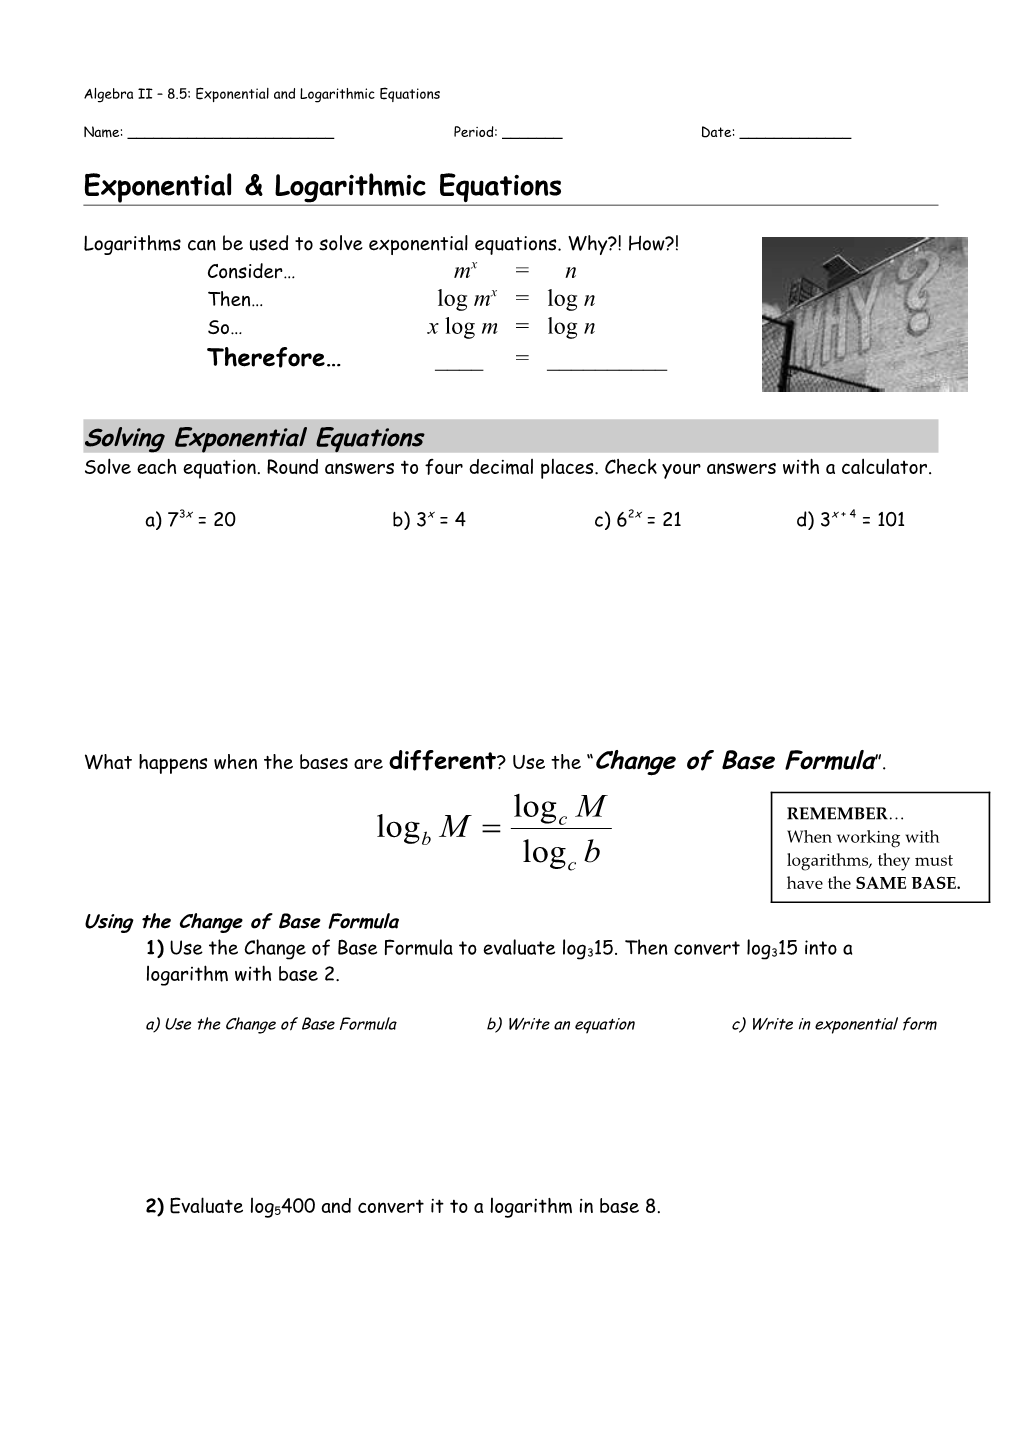 Algebra II 8.5: Exponential and Logarithmic Equations